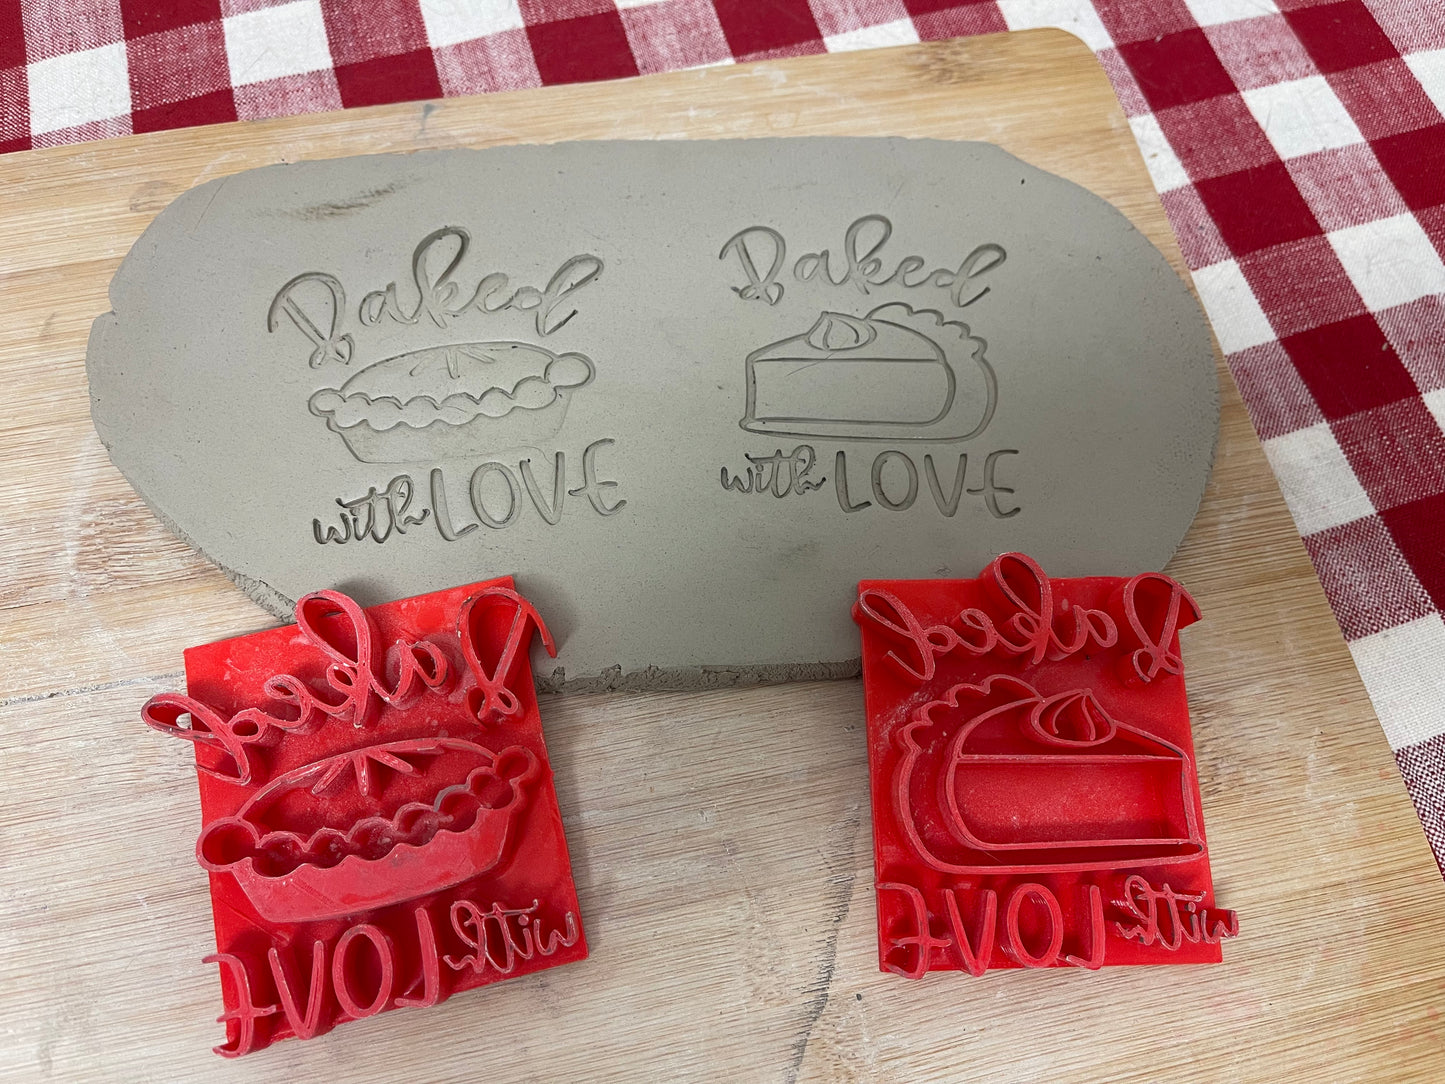 "Baked with Love" (Pie) word stamp - plastic 3D printed, multiple sizes, sold as set or each